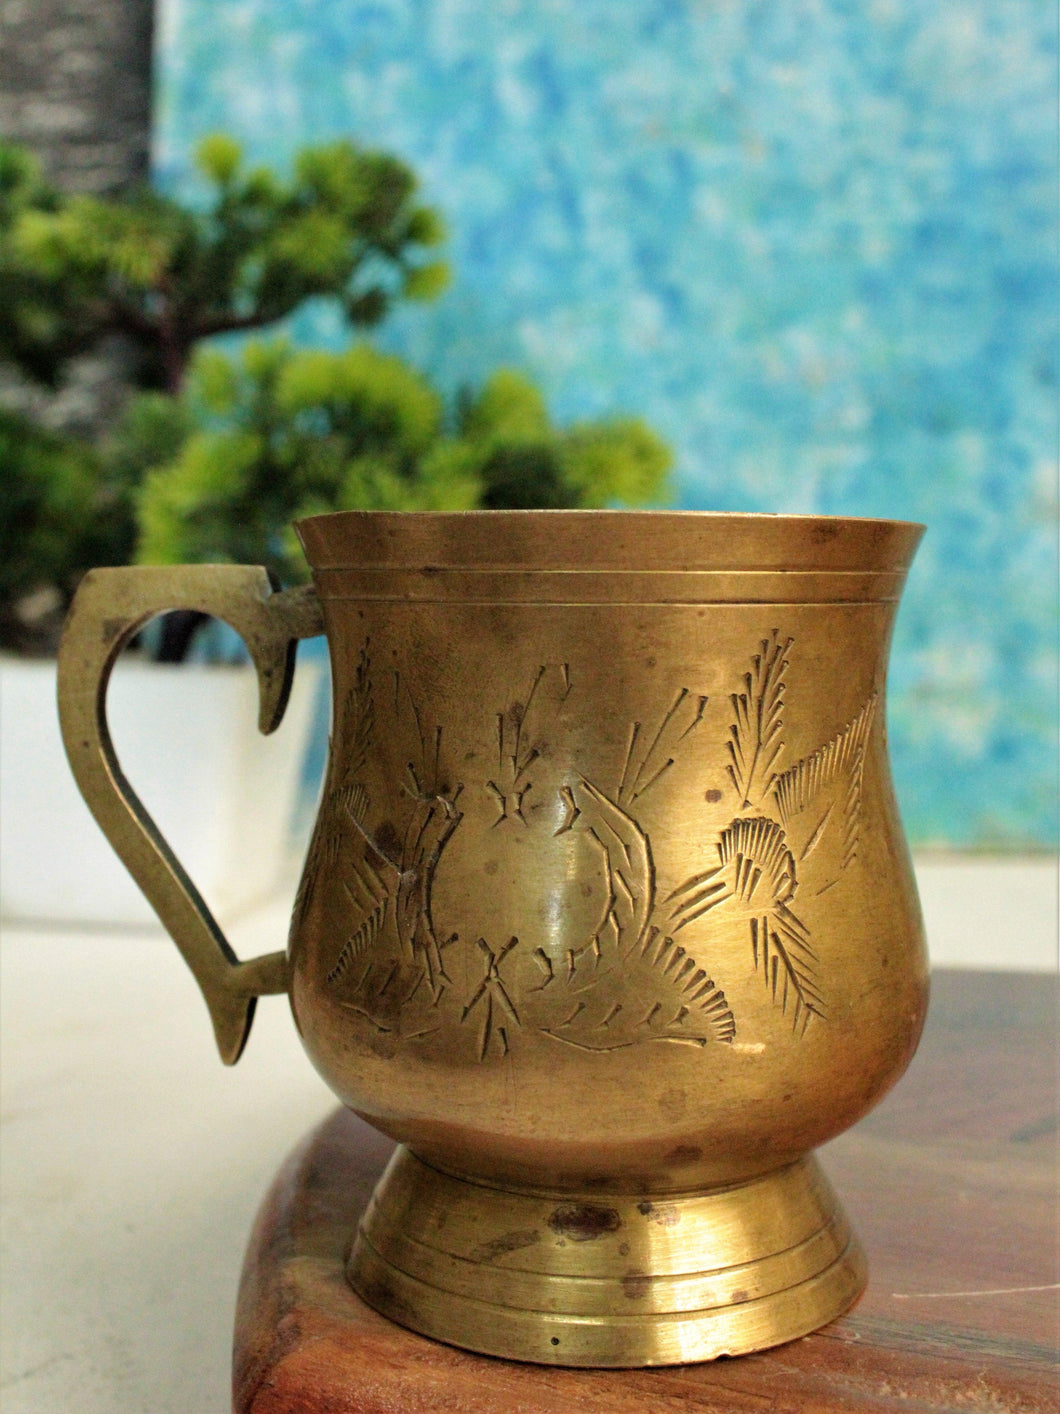 Beautiful Vintage Brass Cup Size 9 x 9 x 7.5 cm - Style It by Hanika